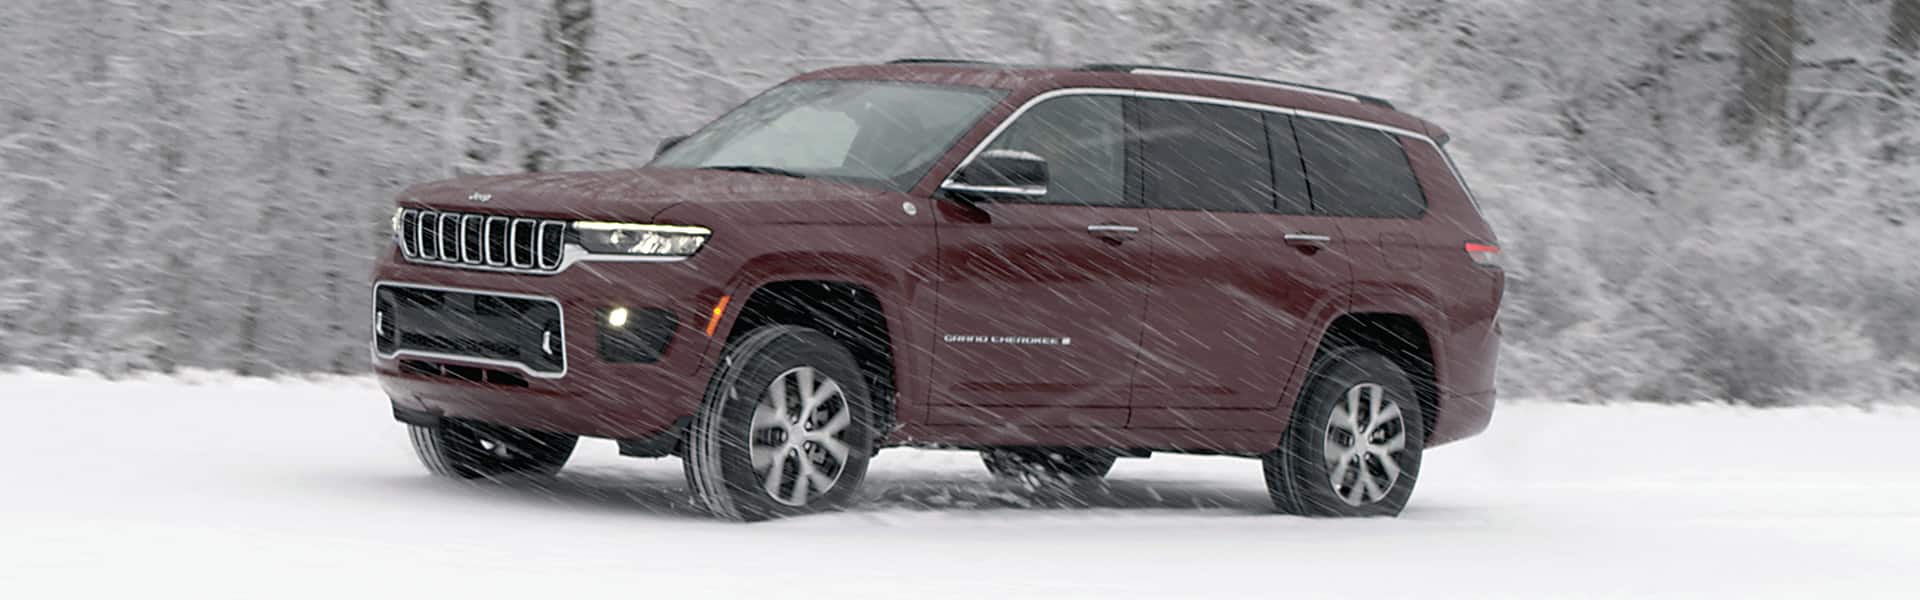 The 2021 Jeep Grand Cherokee L Overland being driven off-road in a snow storm.